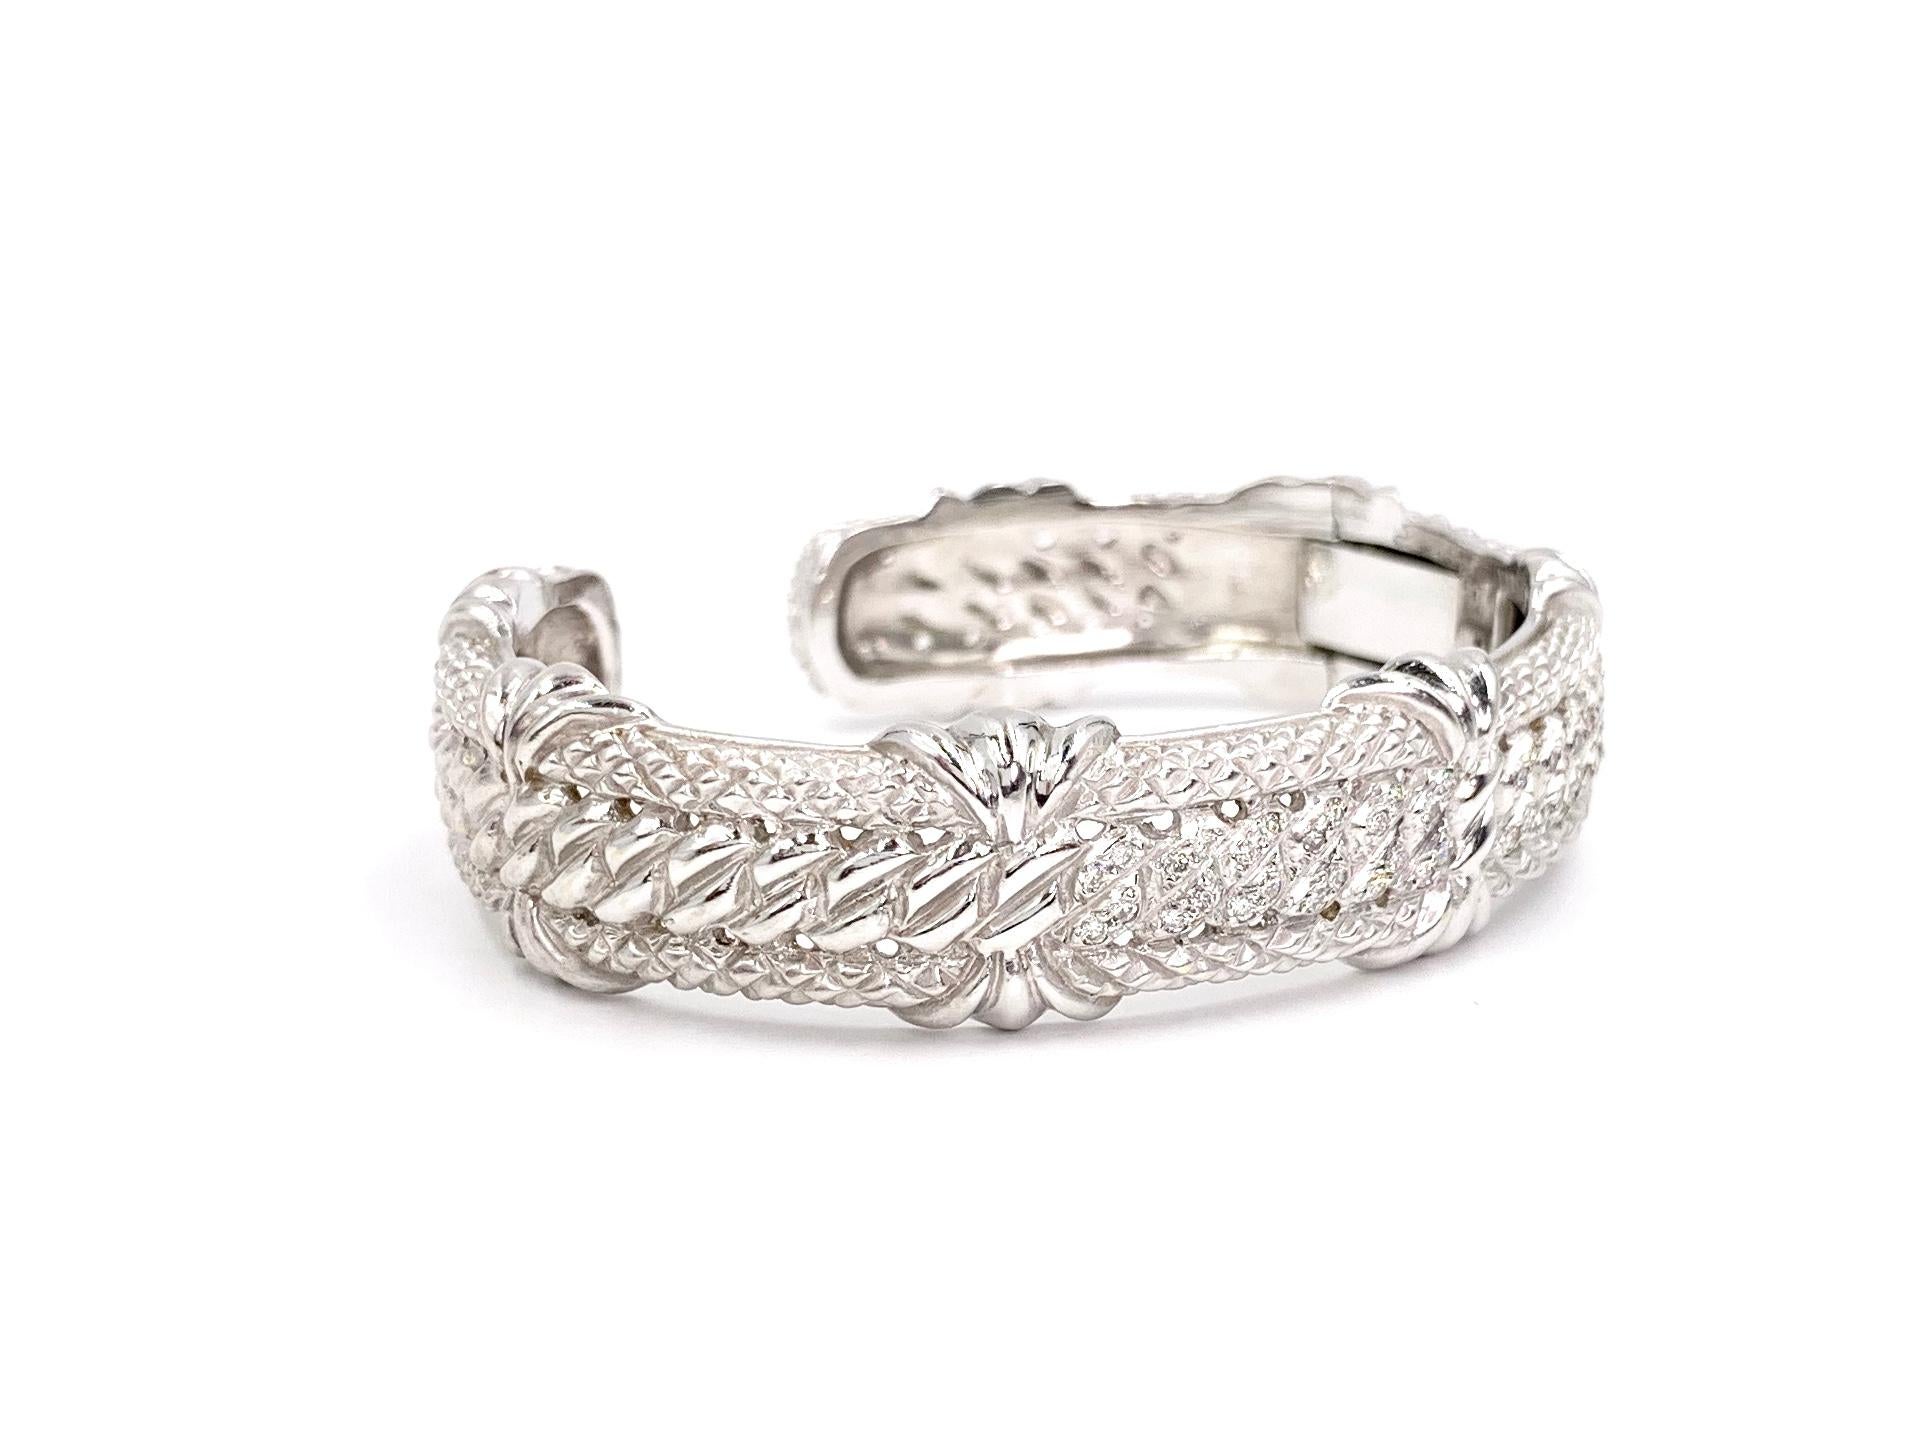 Heavy and substantial 11mm 18 karat white gold carved cuff bracelet with .48 carats of round brilliant diamonds encrusted over the top section. Diamond quality is approximately F color, VS2 clarity. Bracelet features both matte and polished